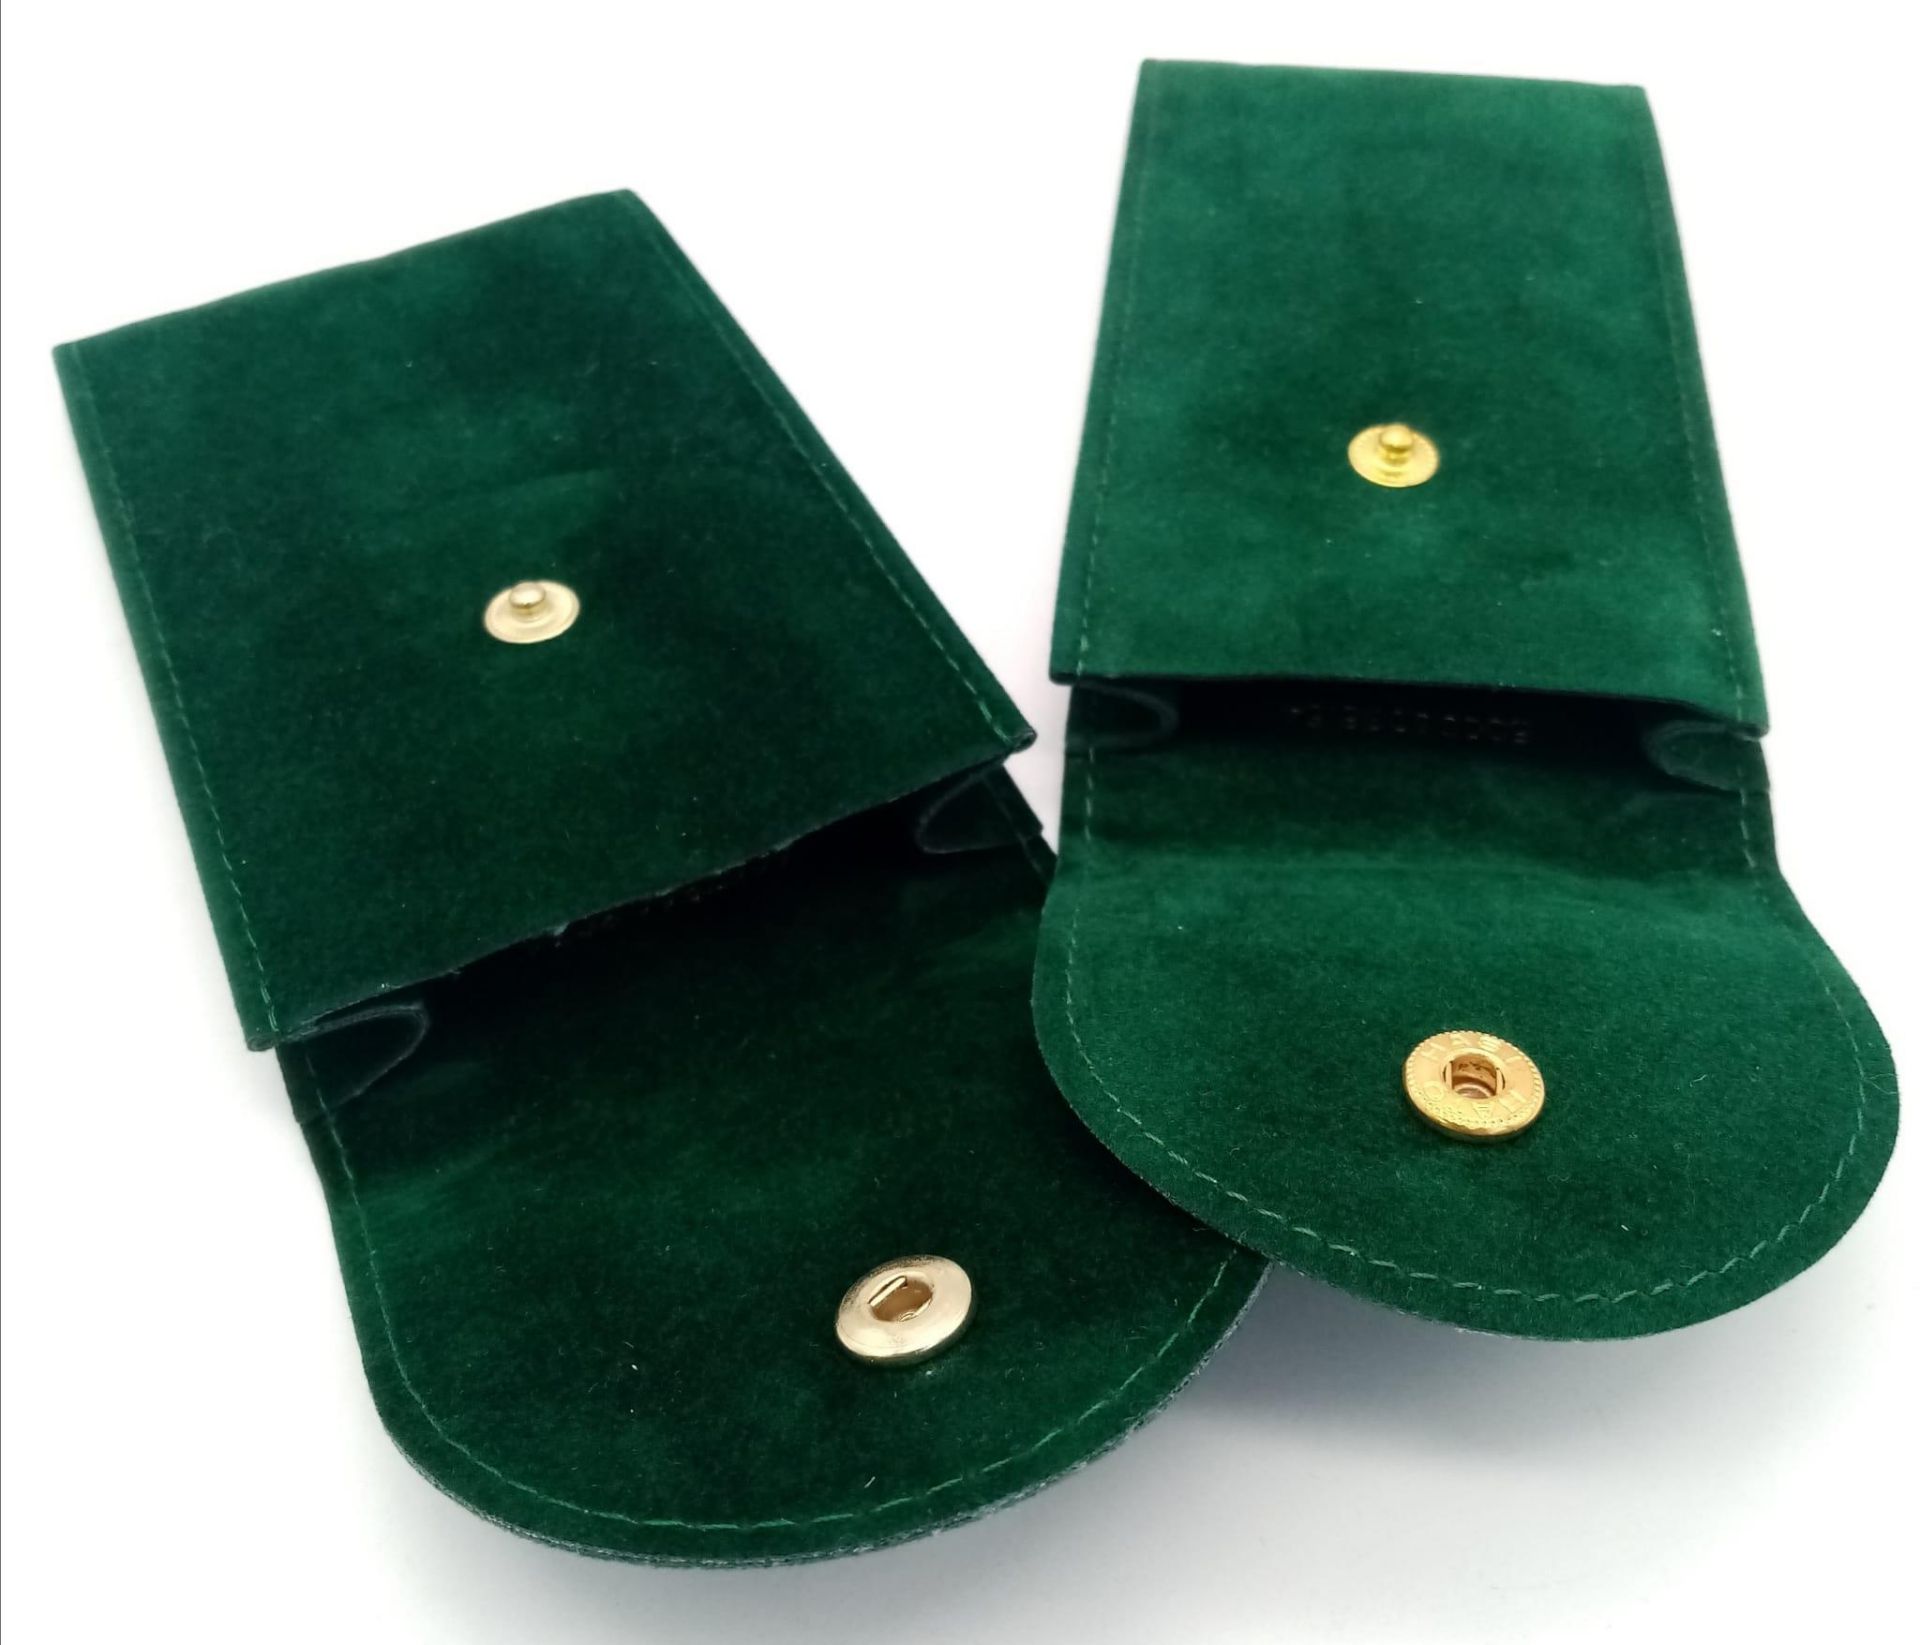 Two Different Sized Rolex Branded Travel Pouches. Soft green textile material. 12cm x 6cm and 11cm x - Bild 2 aus 9